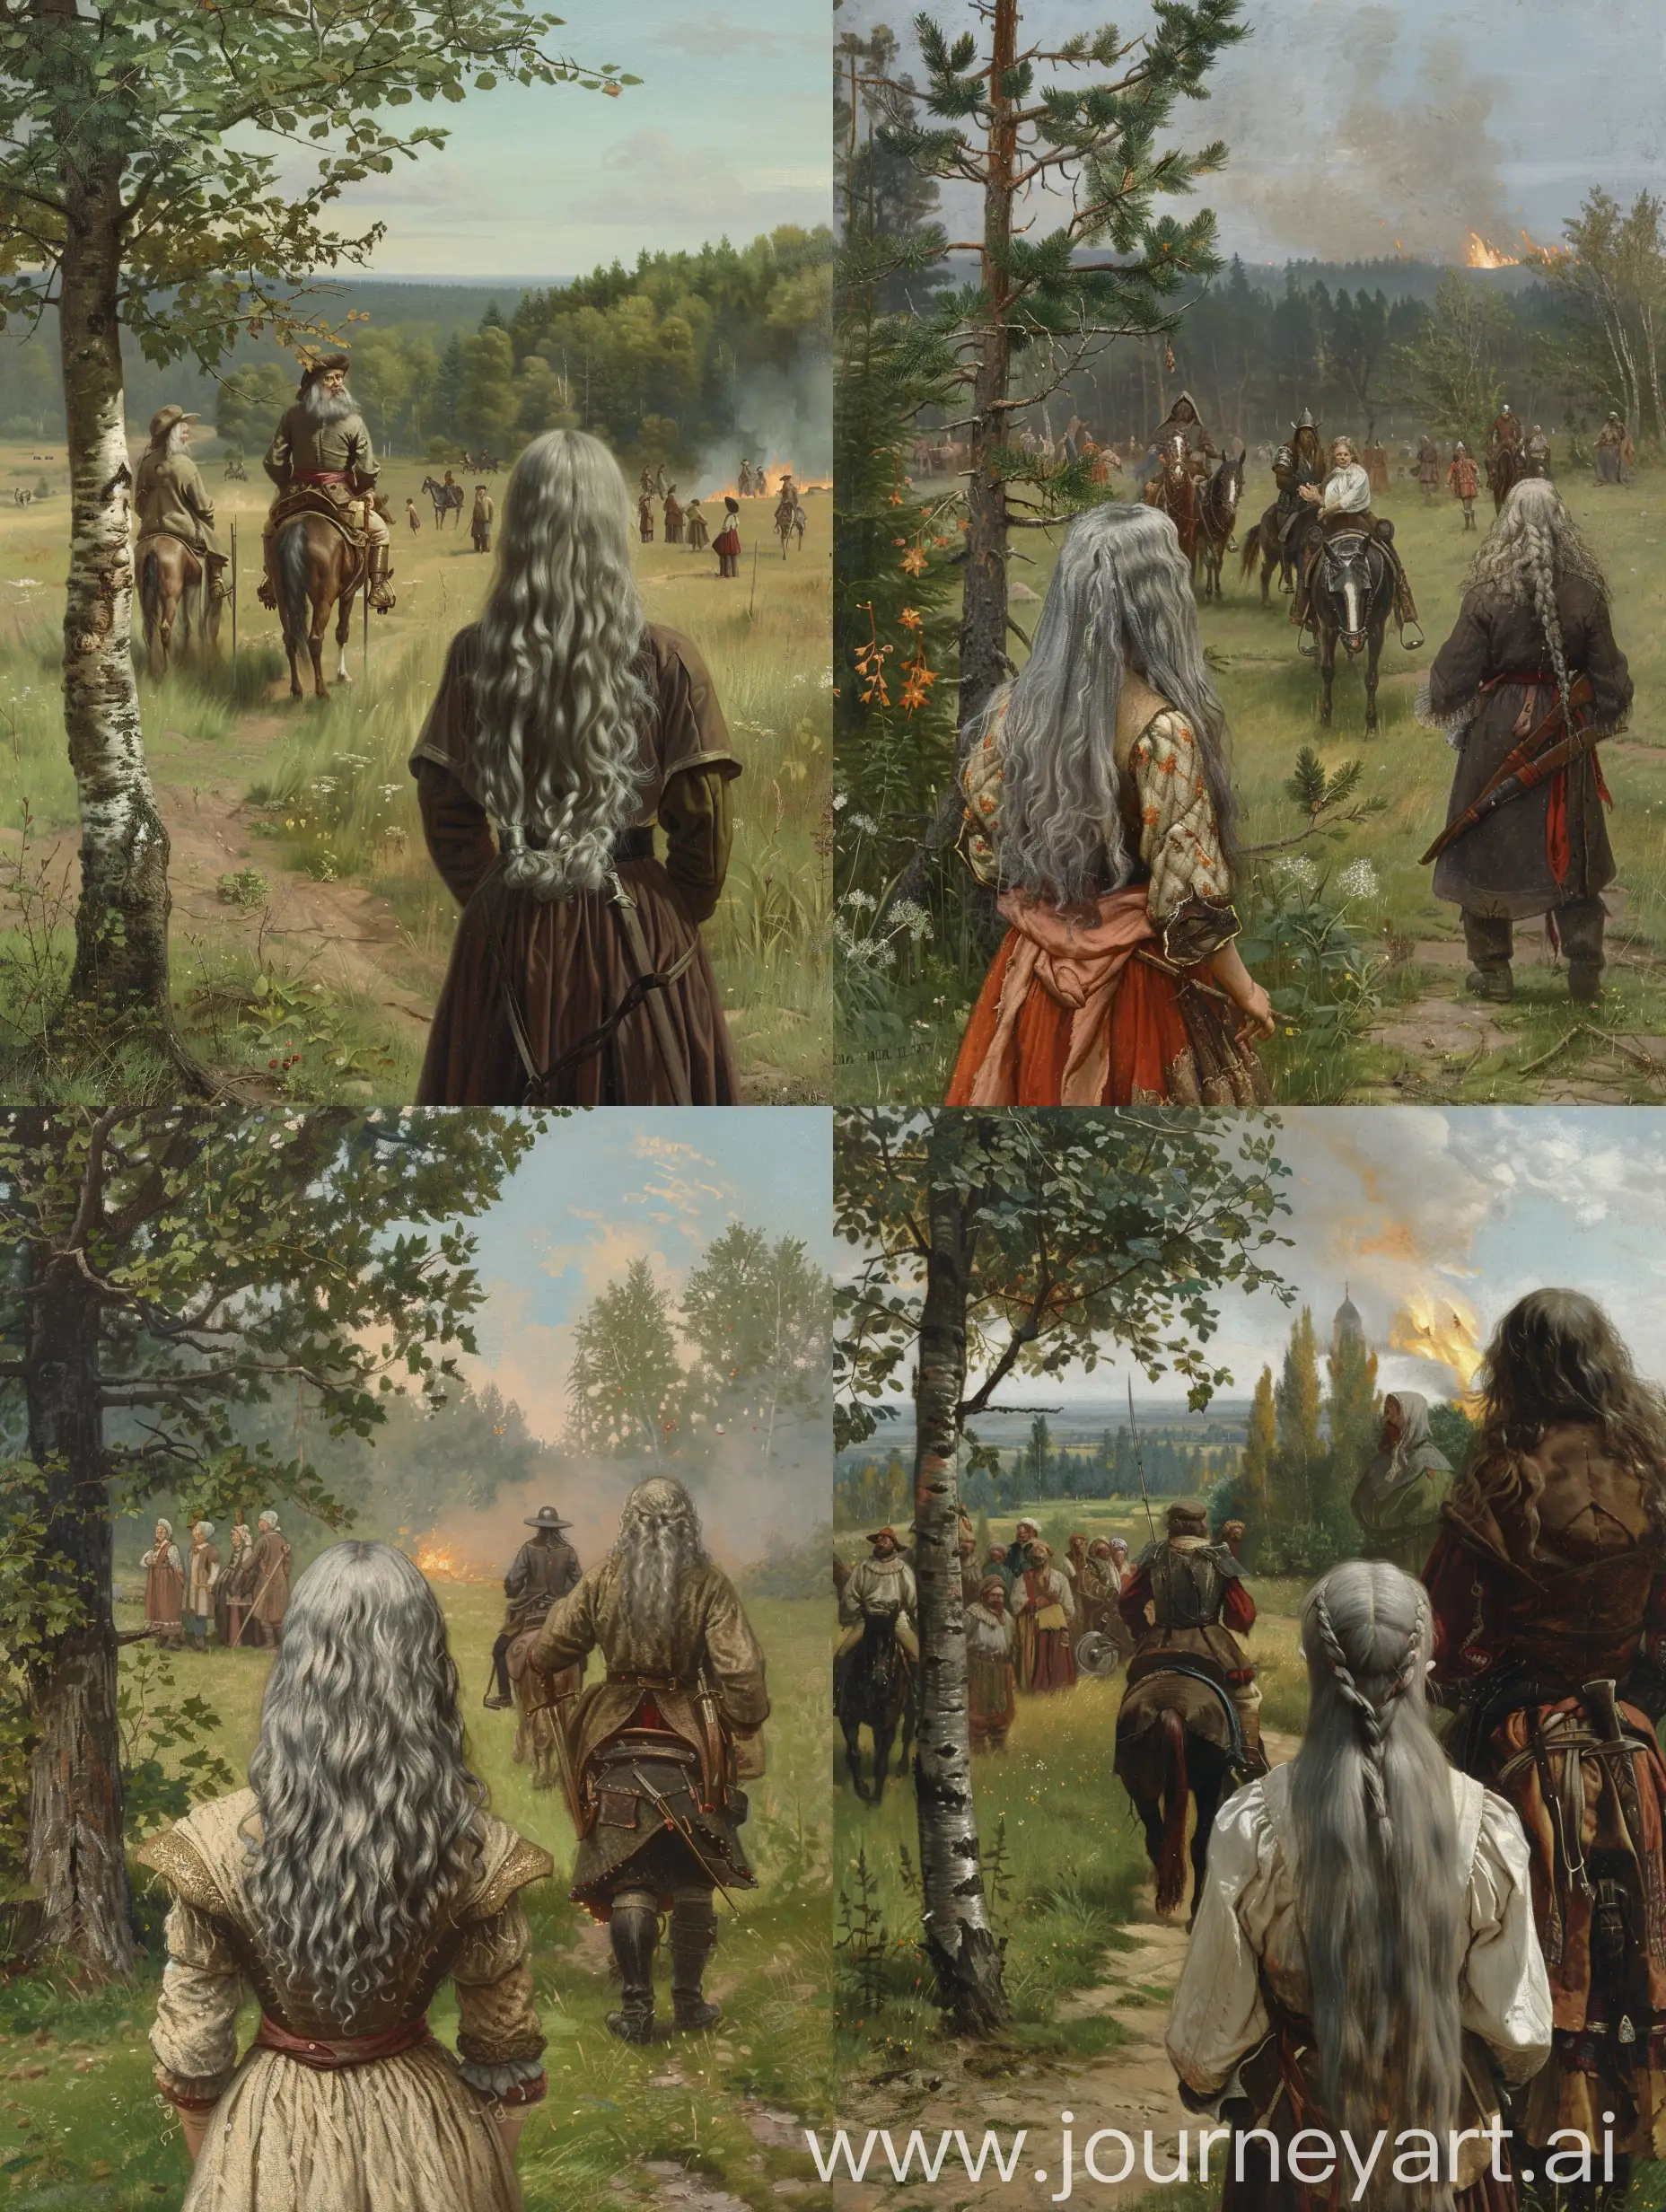 Young-Girl-Tila-Confronts-Evil-BanditsRiders-near-Rowan-Tree-amidst-Peasant-Uprising-and-Forest-Fire-18th19th-Century-Summer-Scene